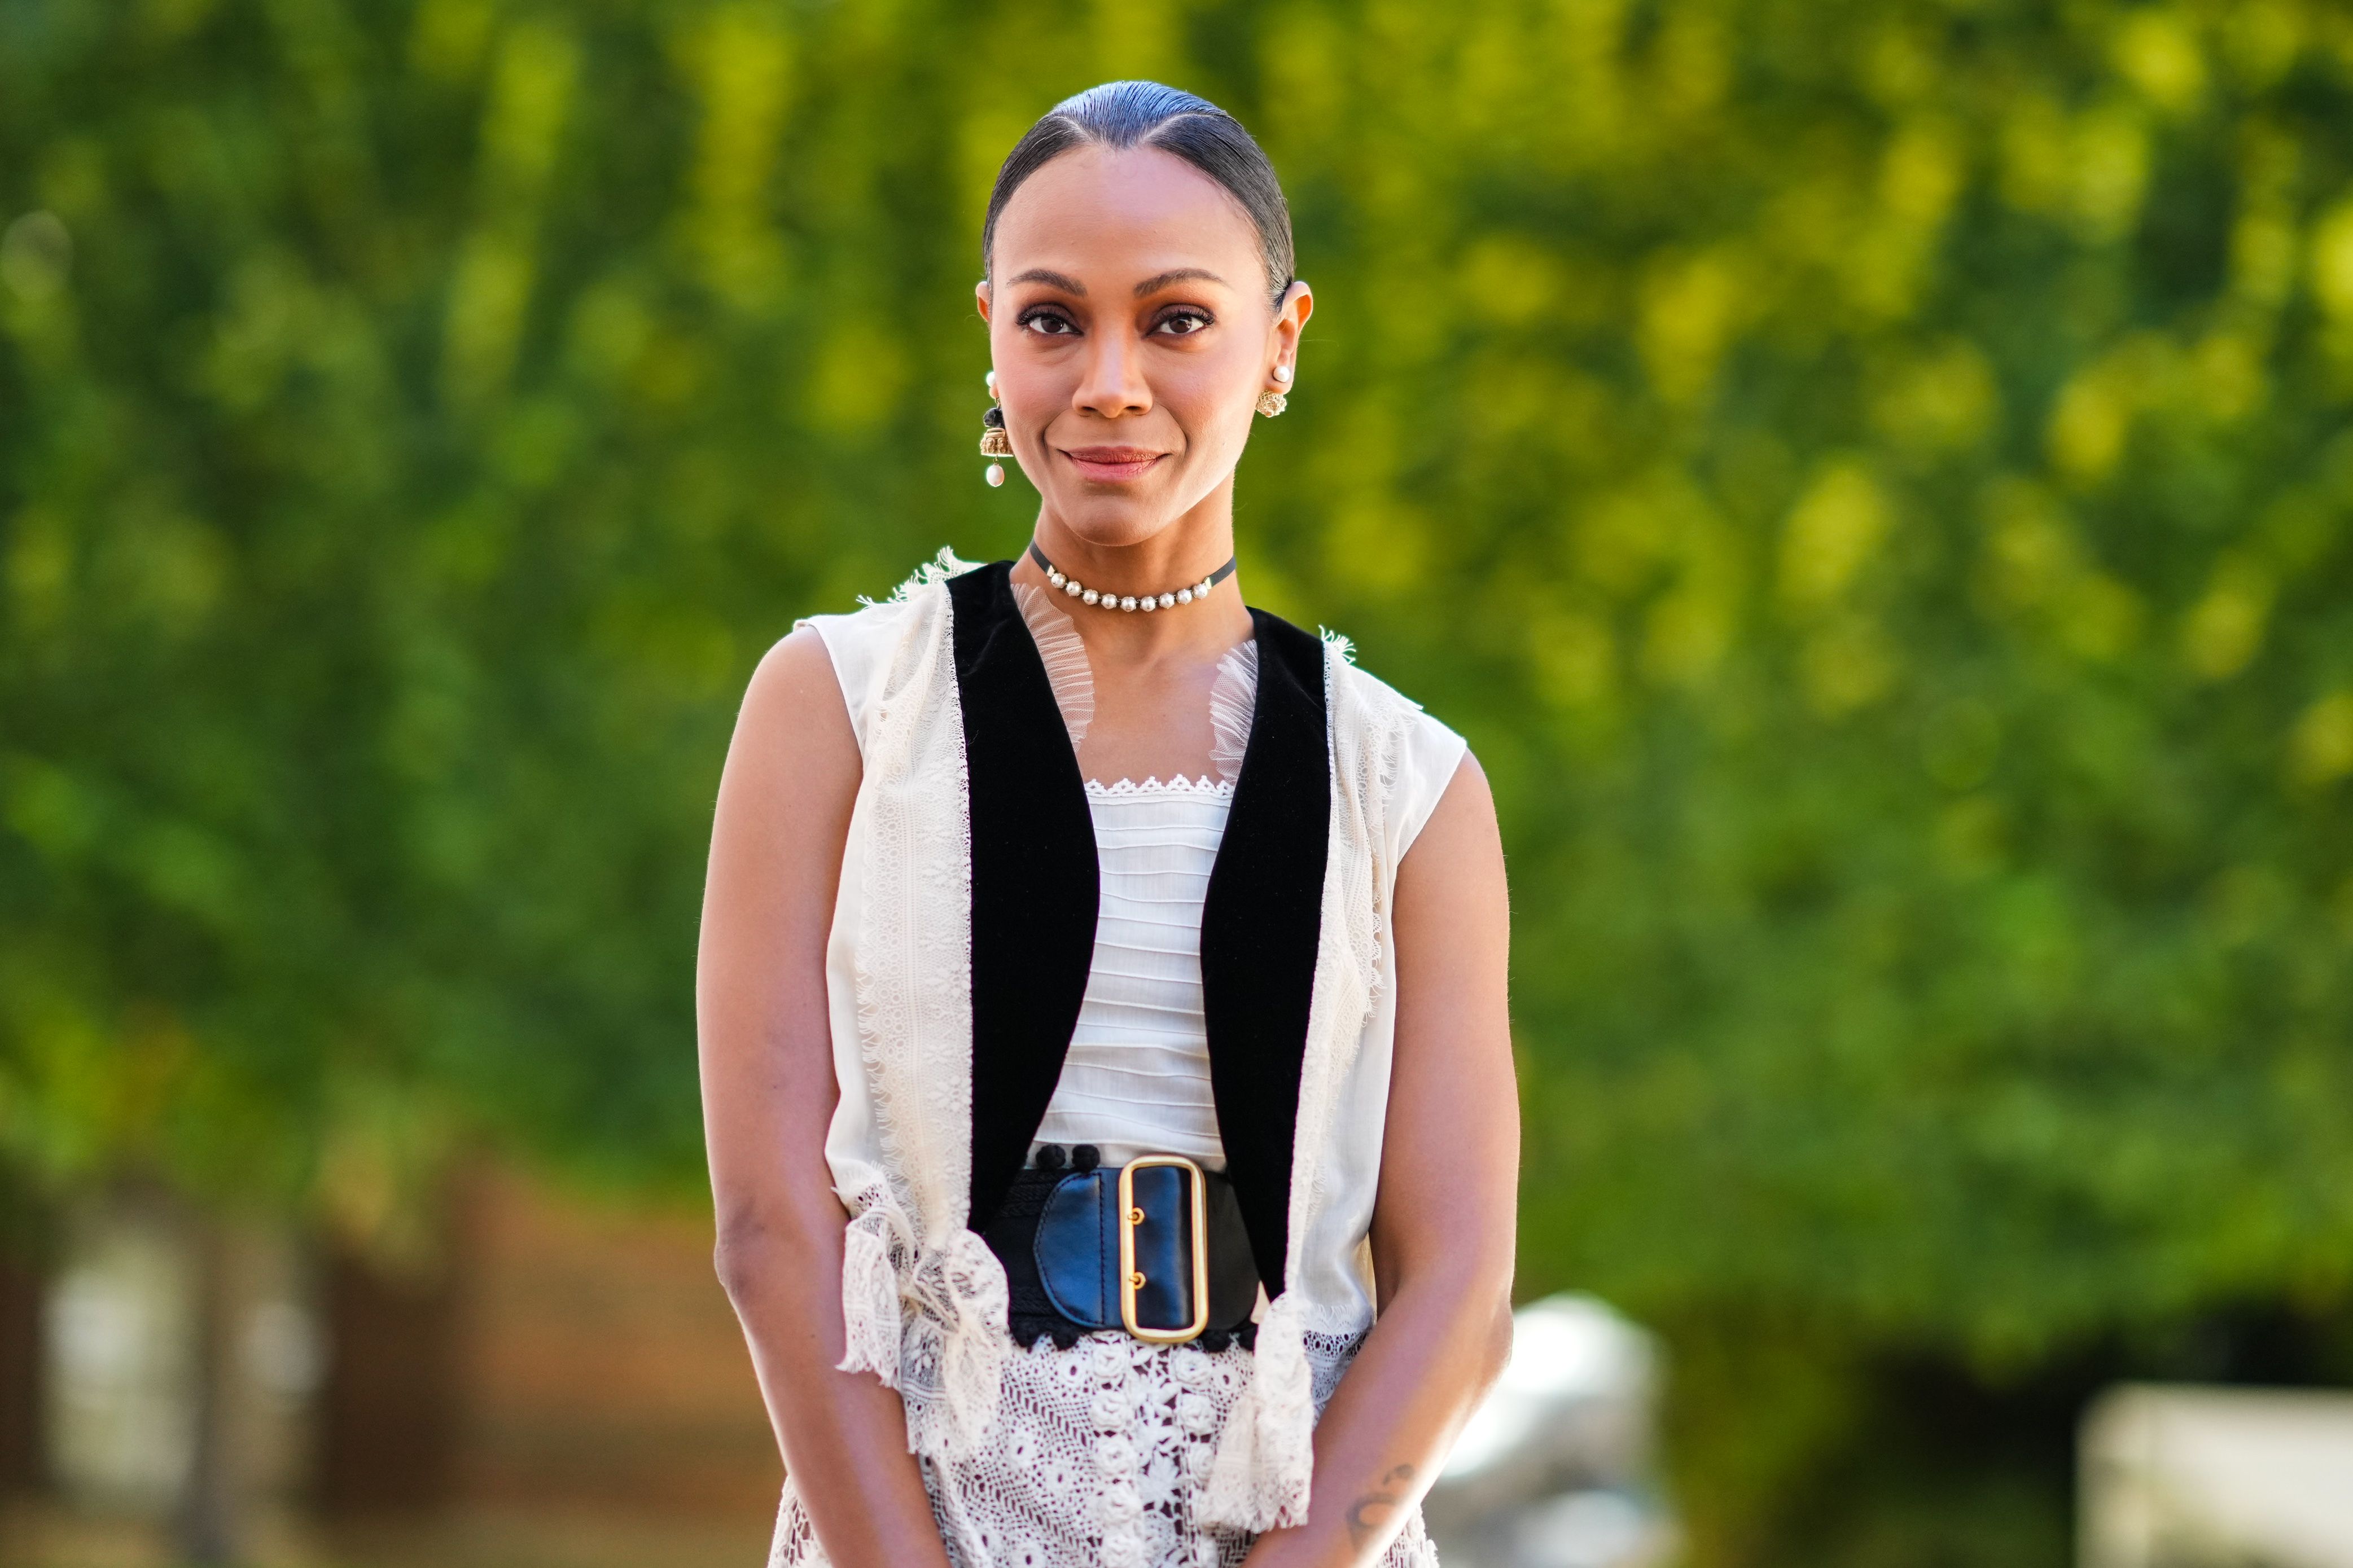 Wardrobe Stories: Zoe Saldana Muses On Style As She Gets Ready For